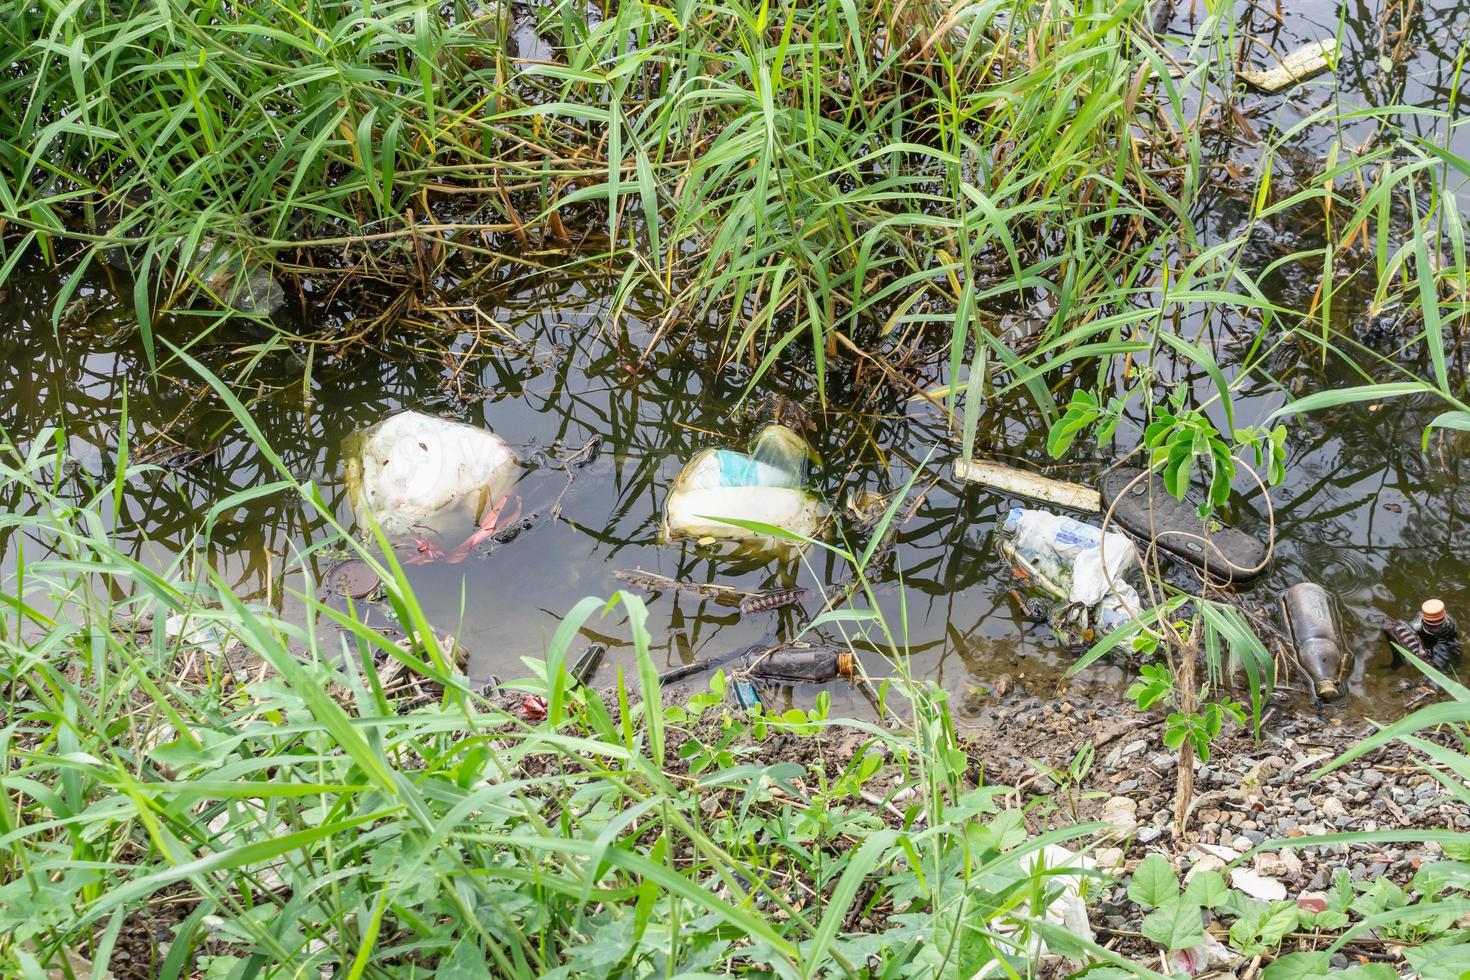 Plastic pollution in water pond environment photo